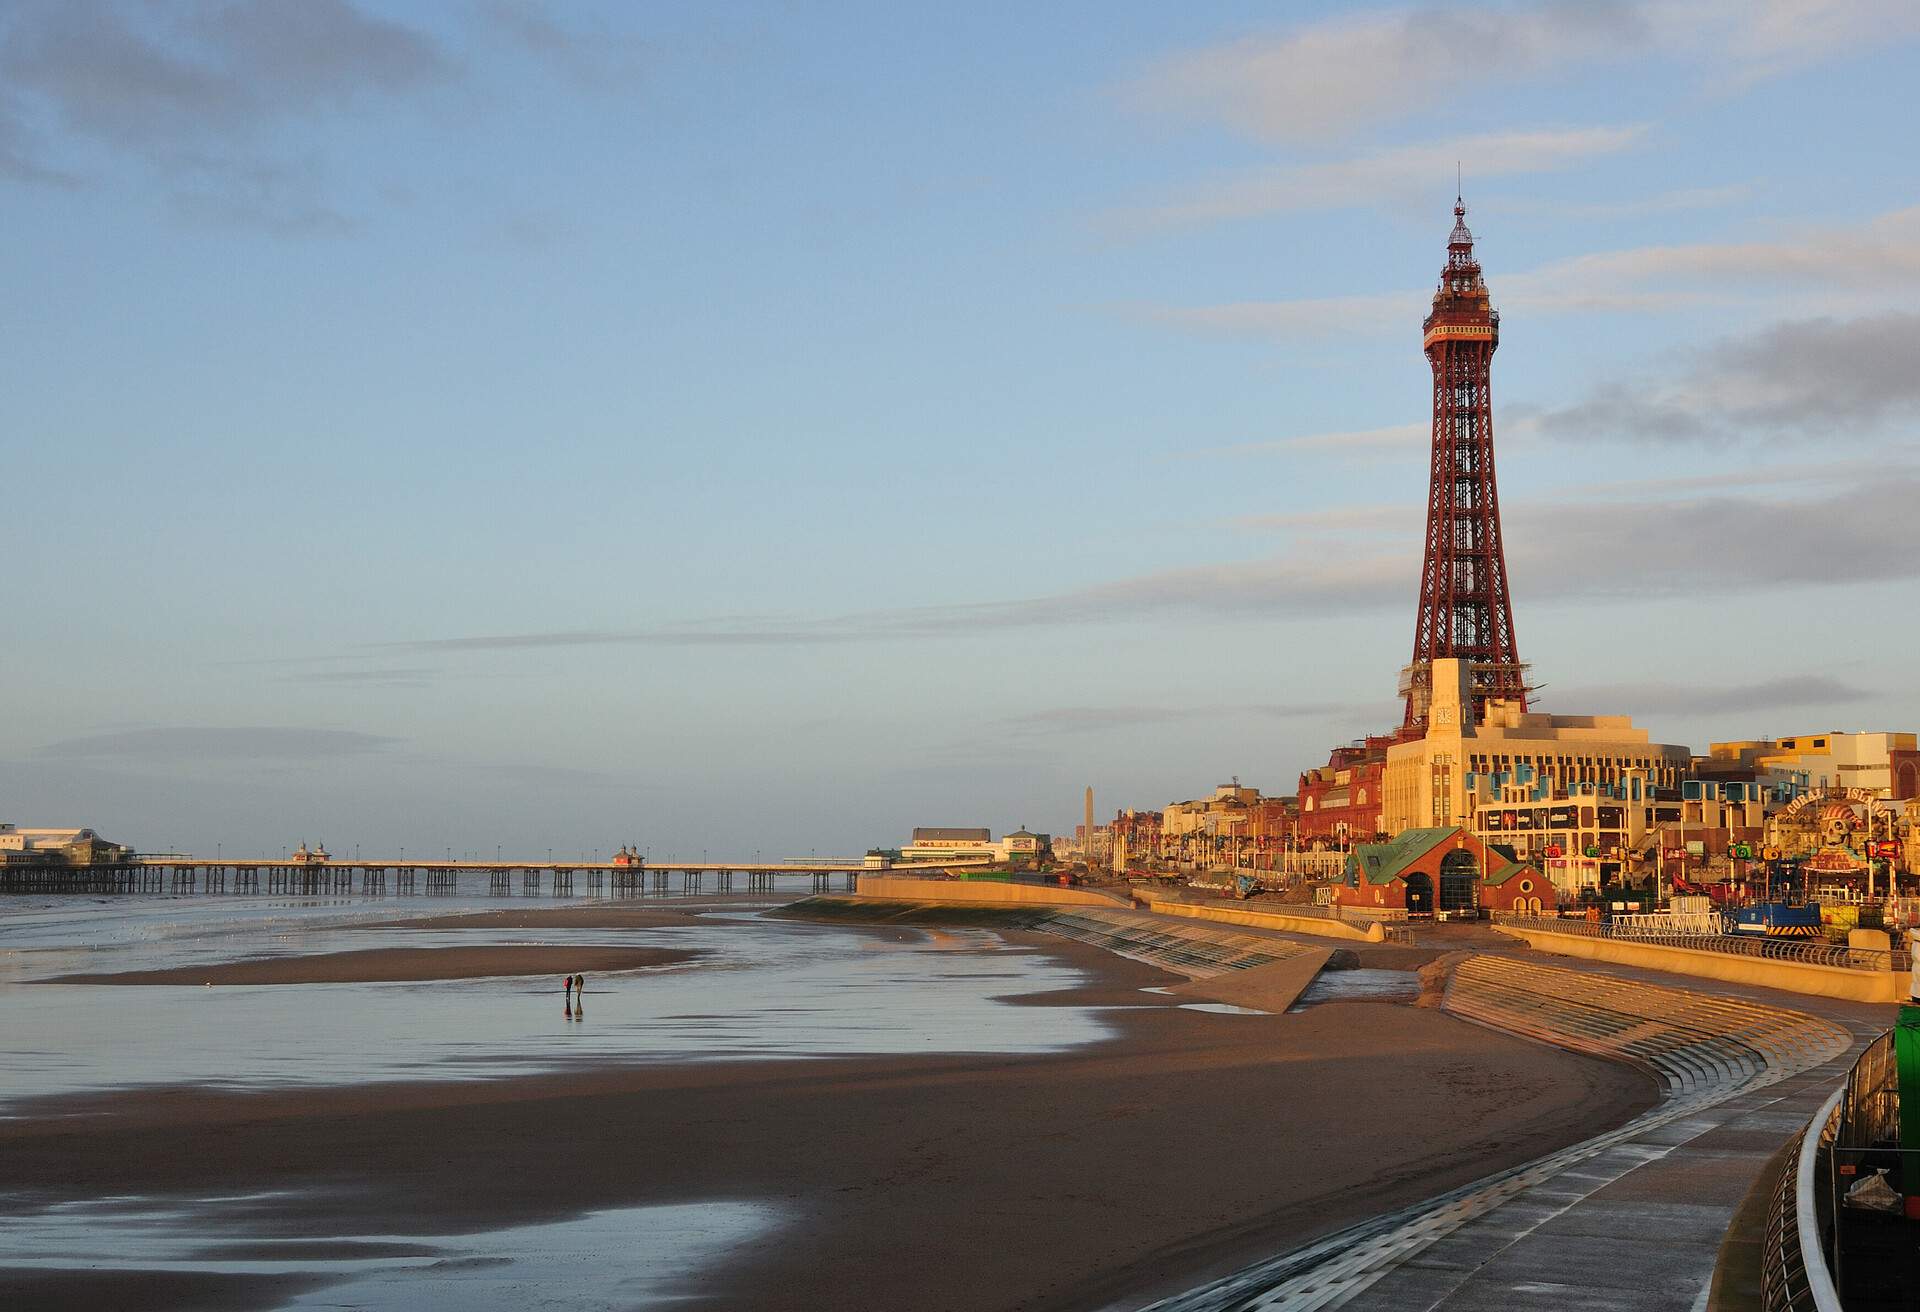 DEST_UK_NORTH-PIER_BLACKPOOL-TOWER_GettyImages-111717134